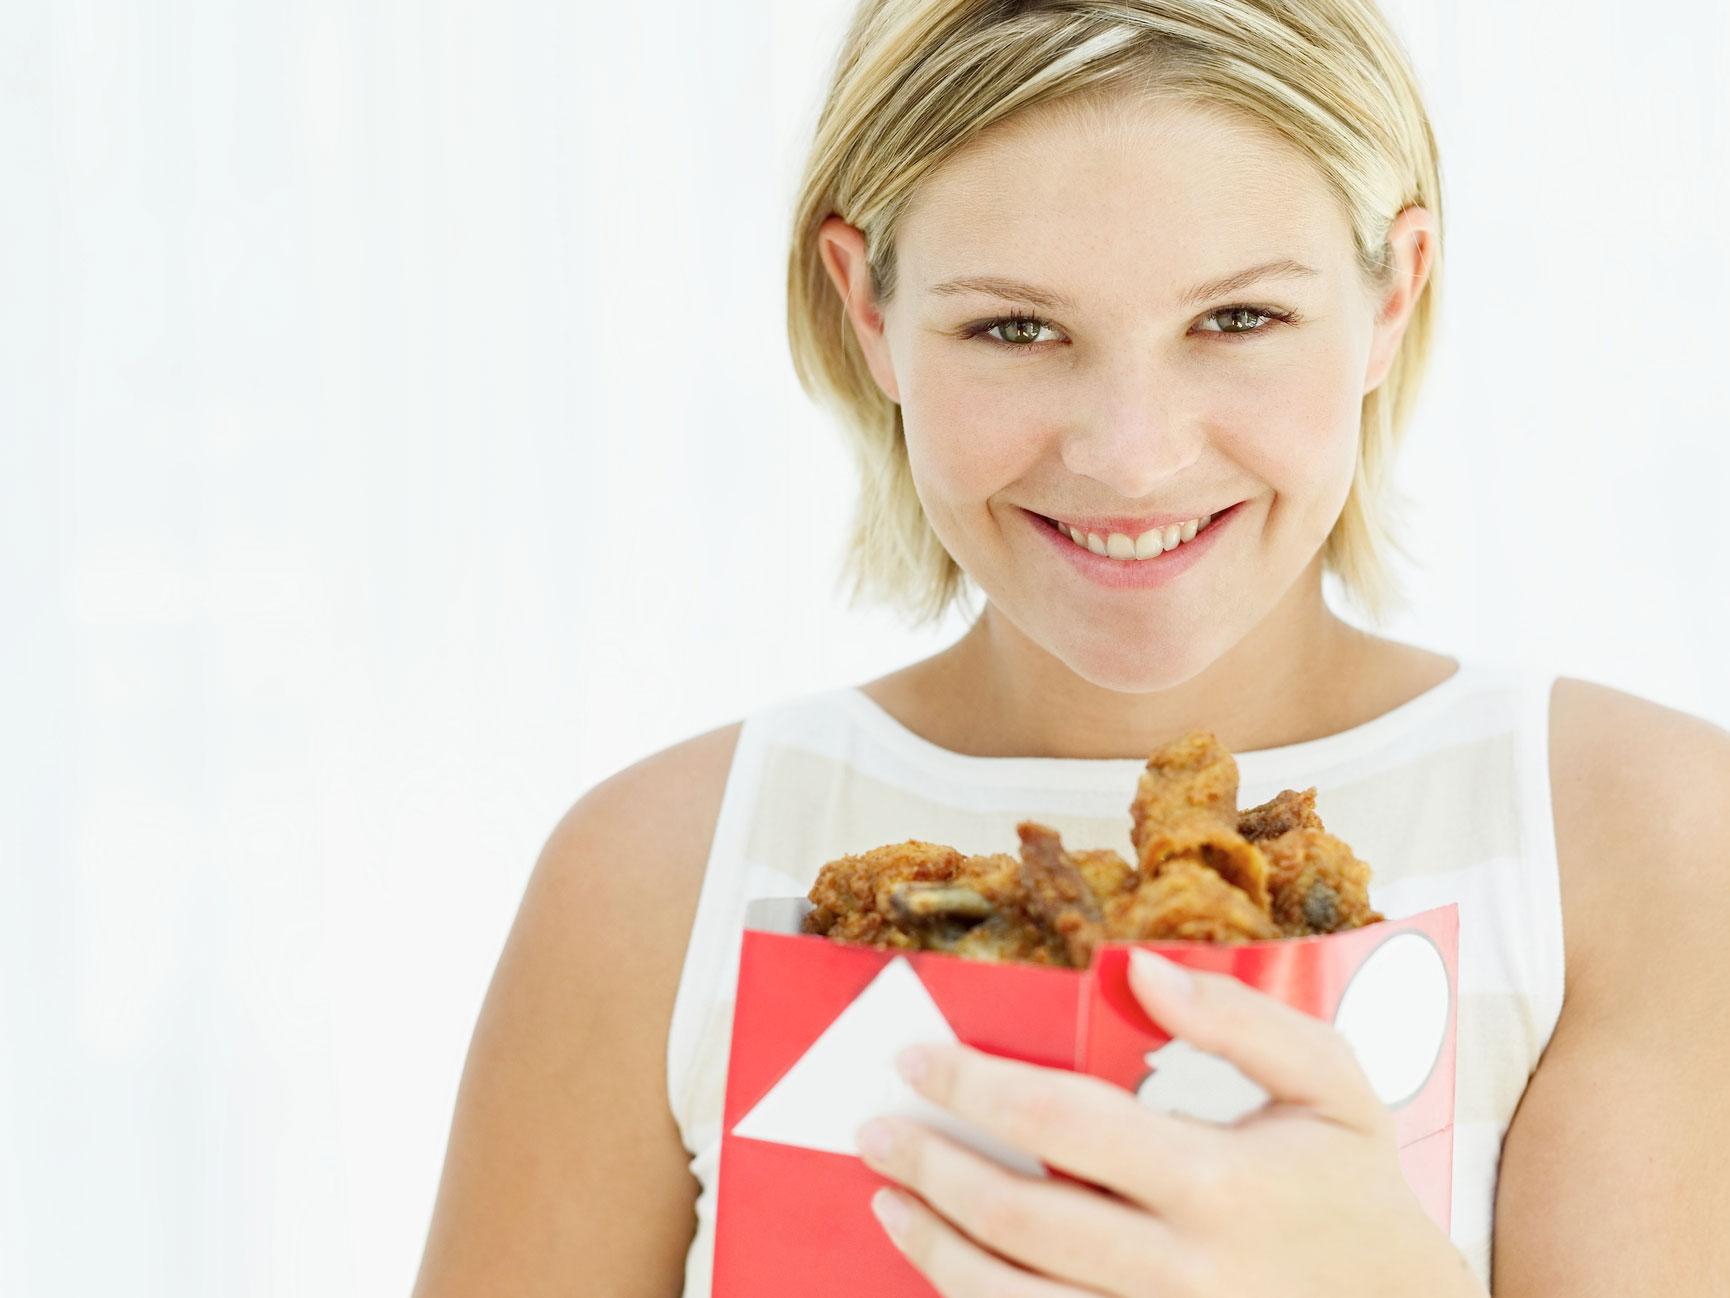 Will eating fried food fry your lifespan?